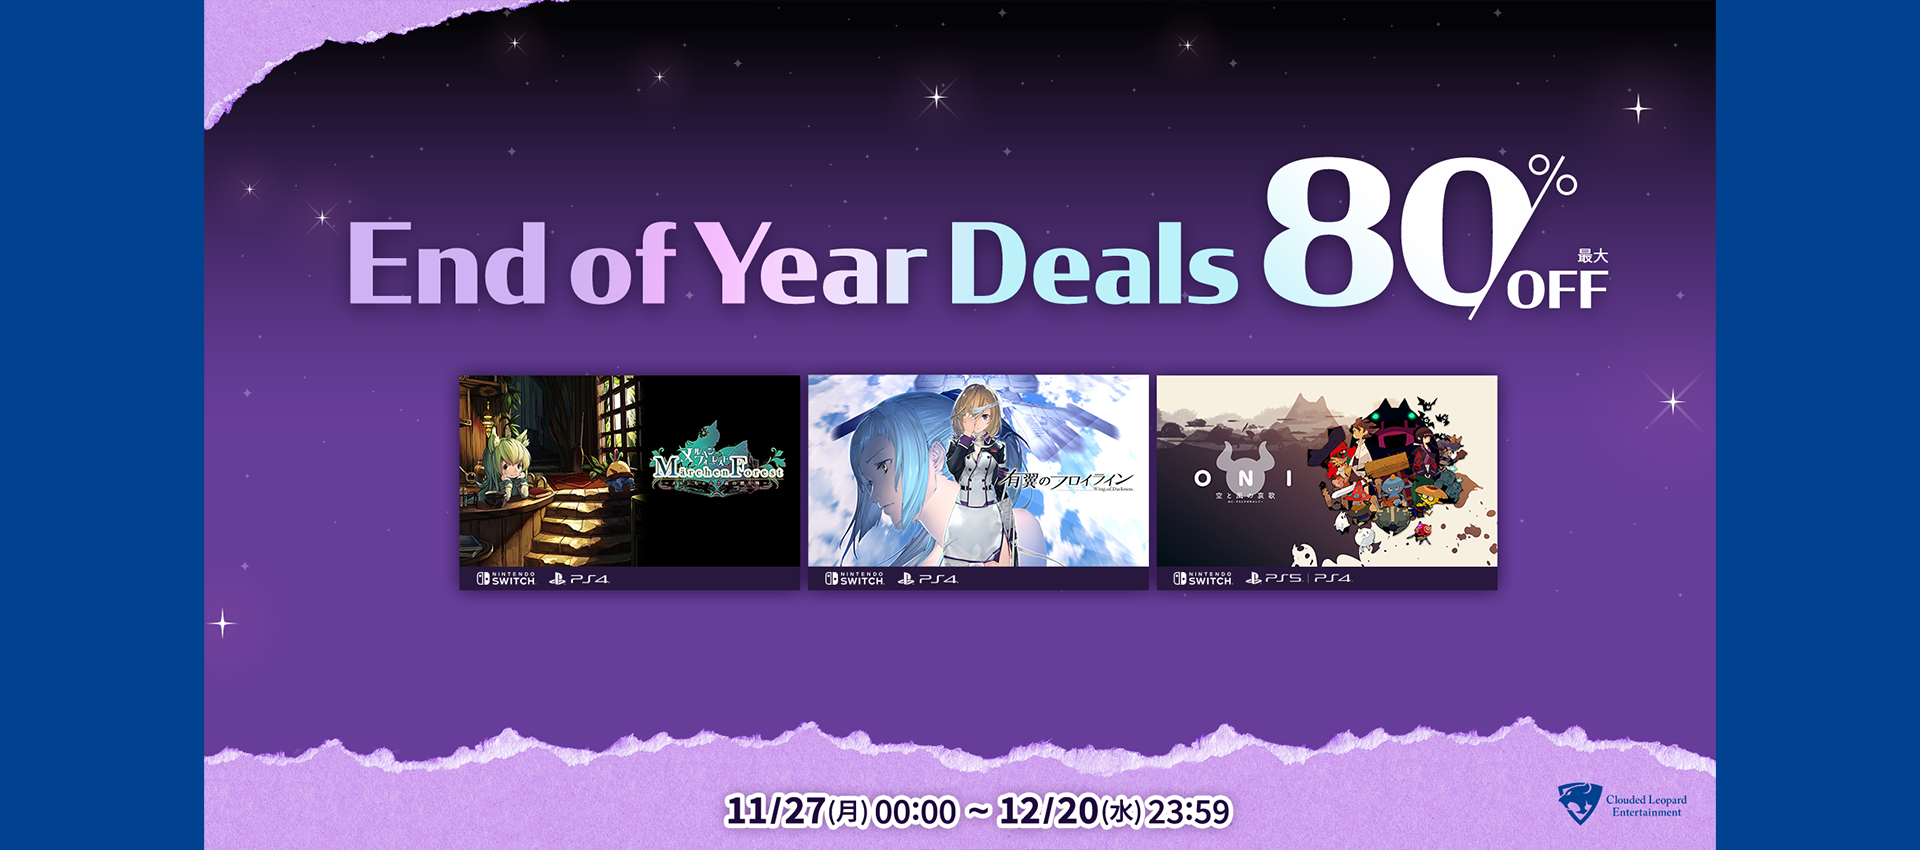 End of Year Deals